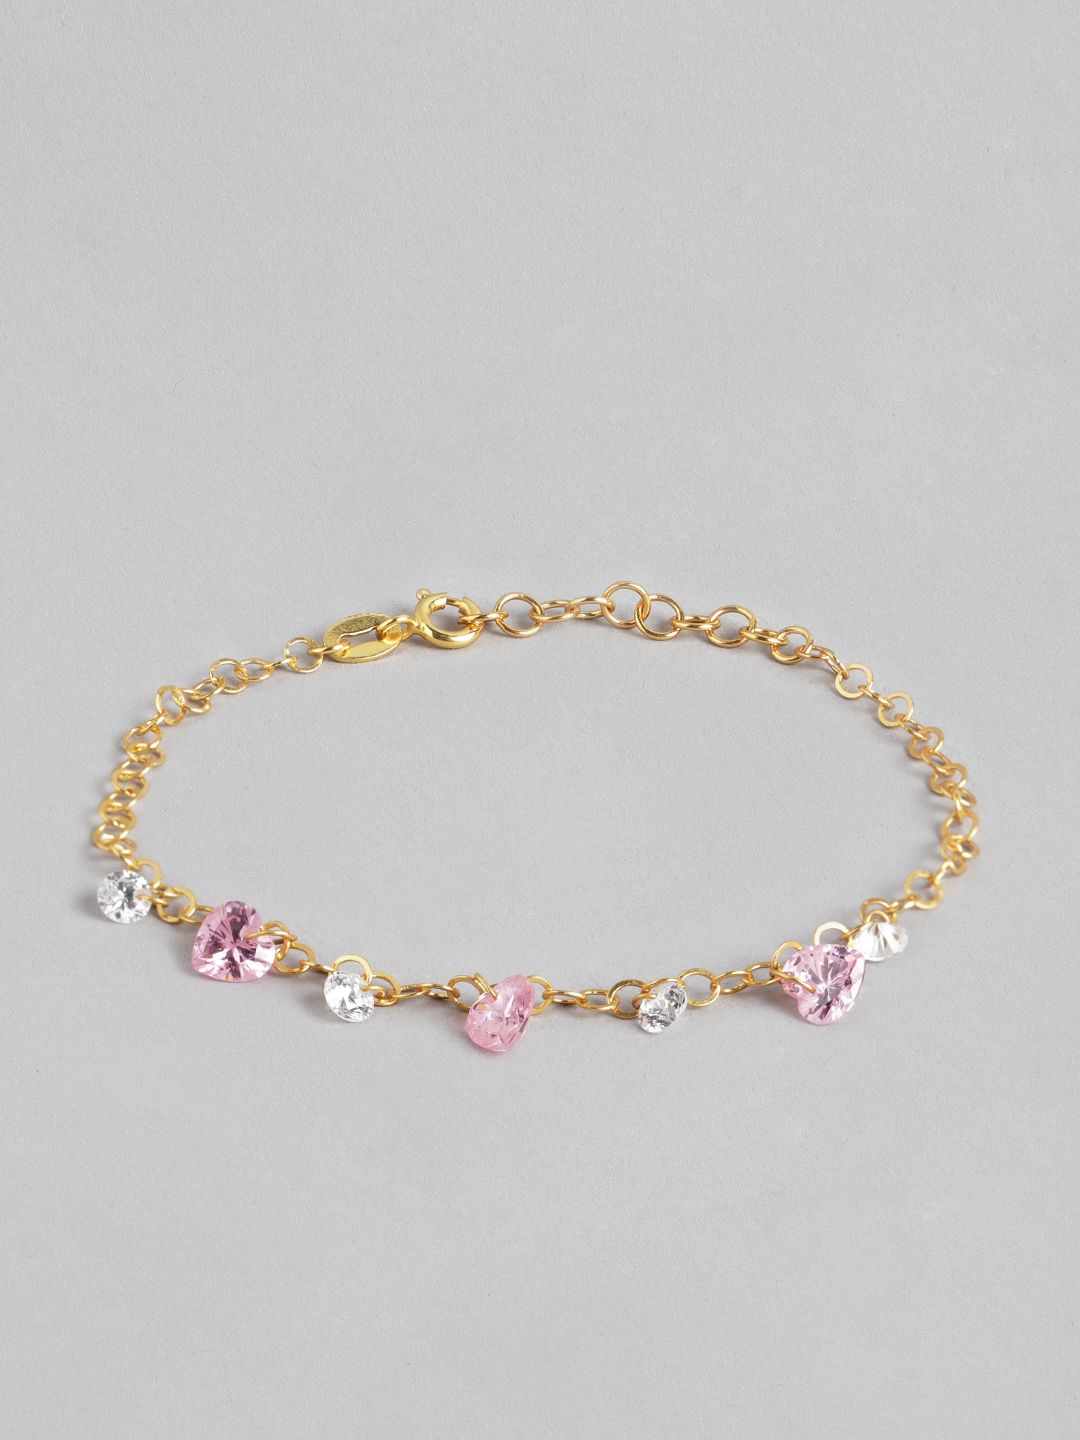 Carlton London Gold-Plated Pink CZ Studded Handcrafted Charm Bracelet Price in India